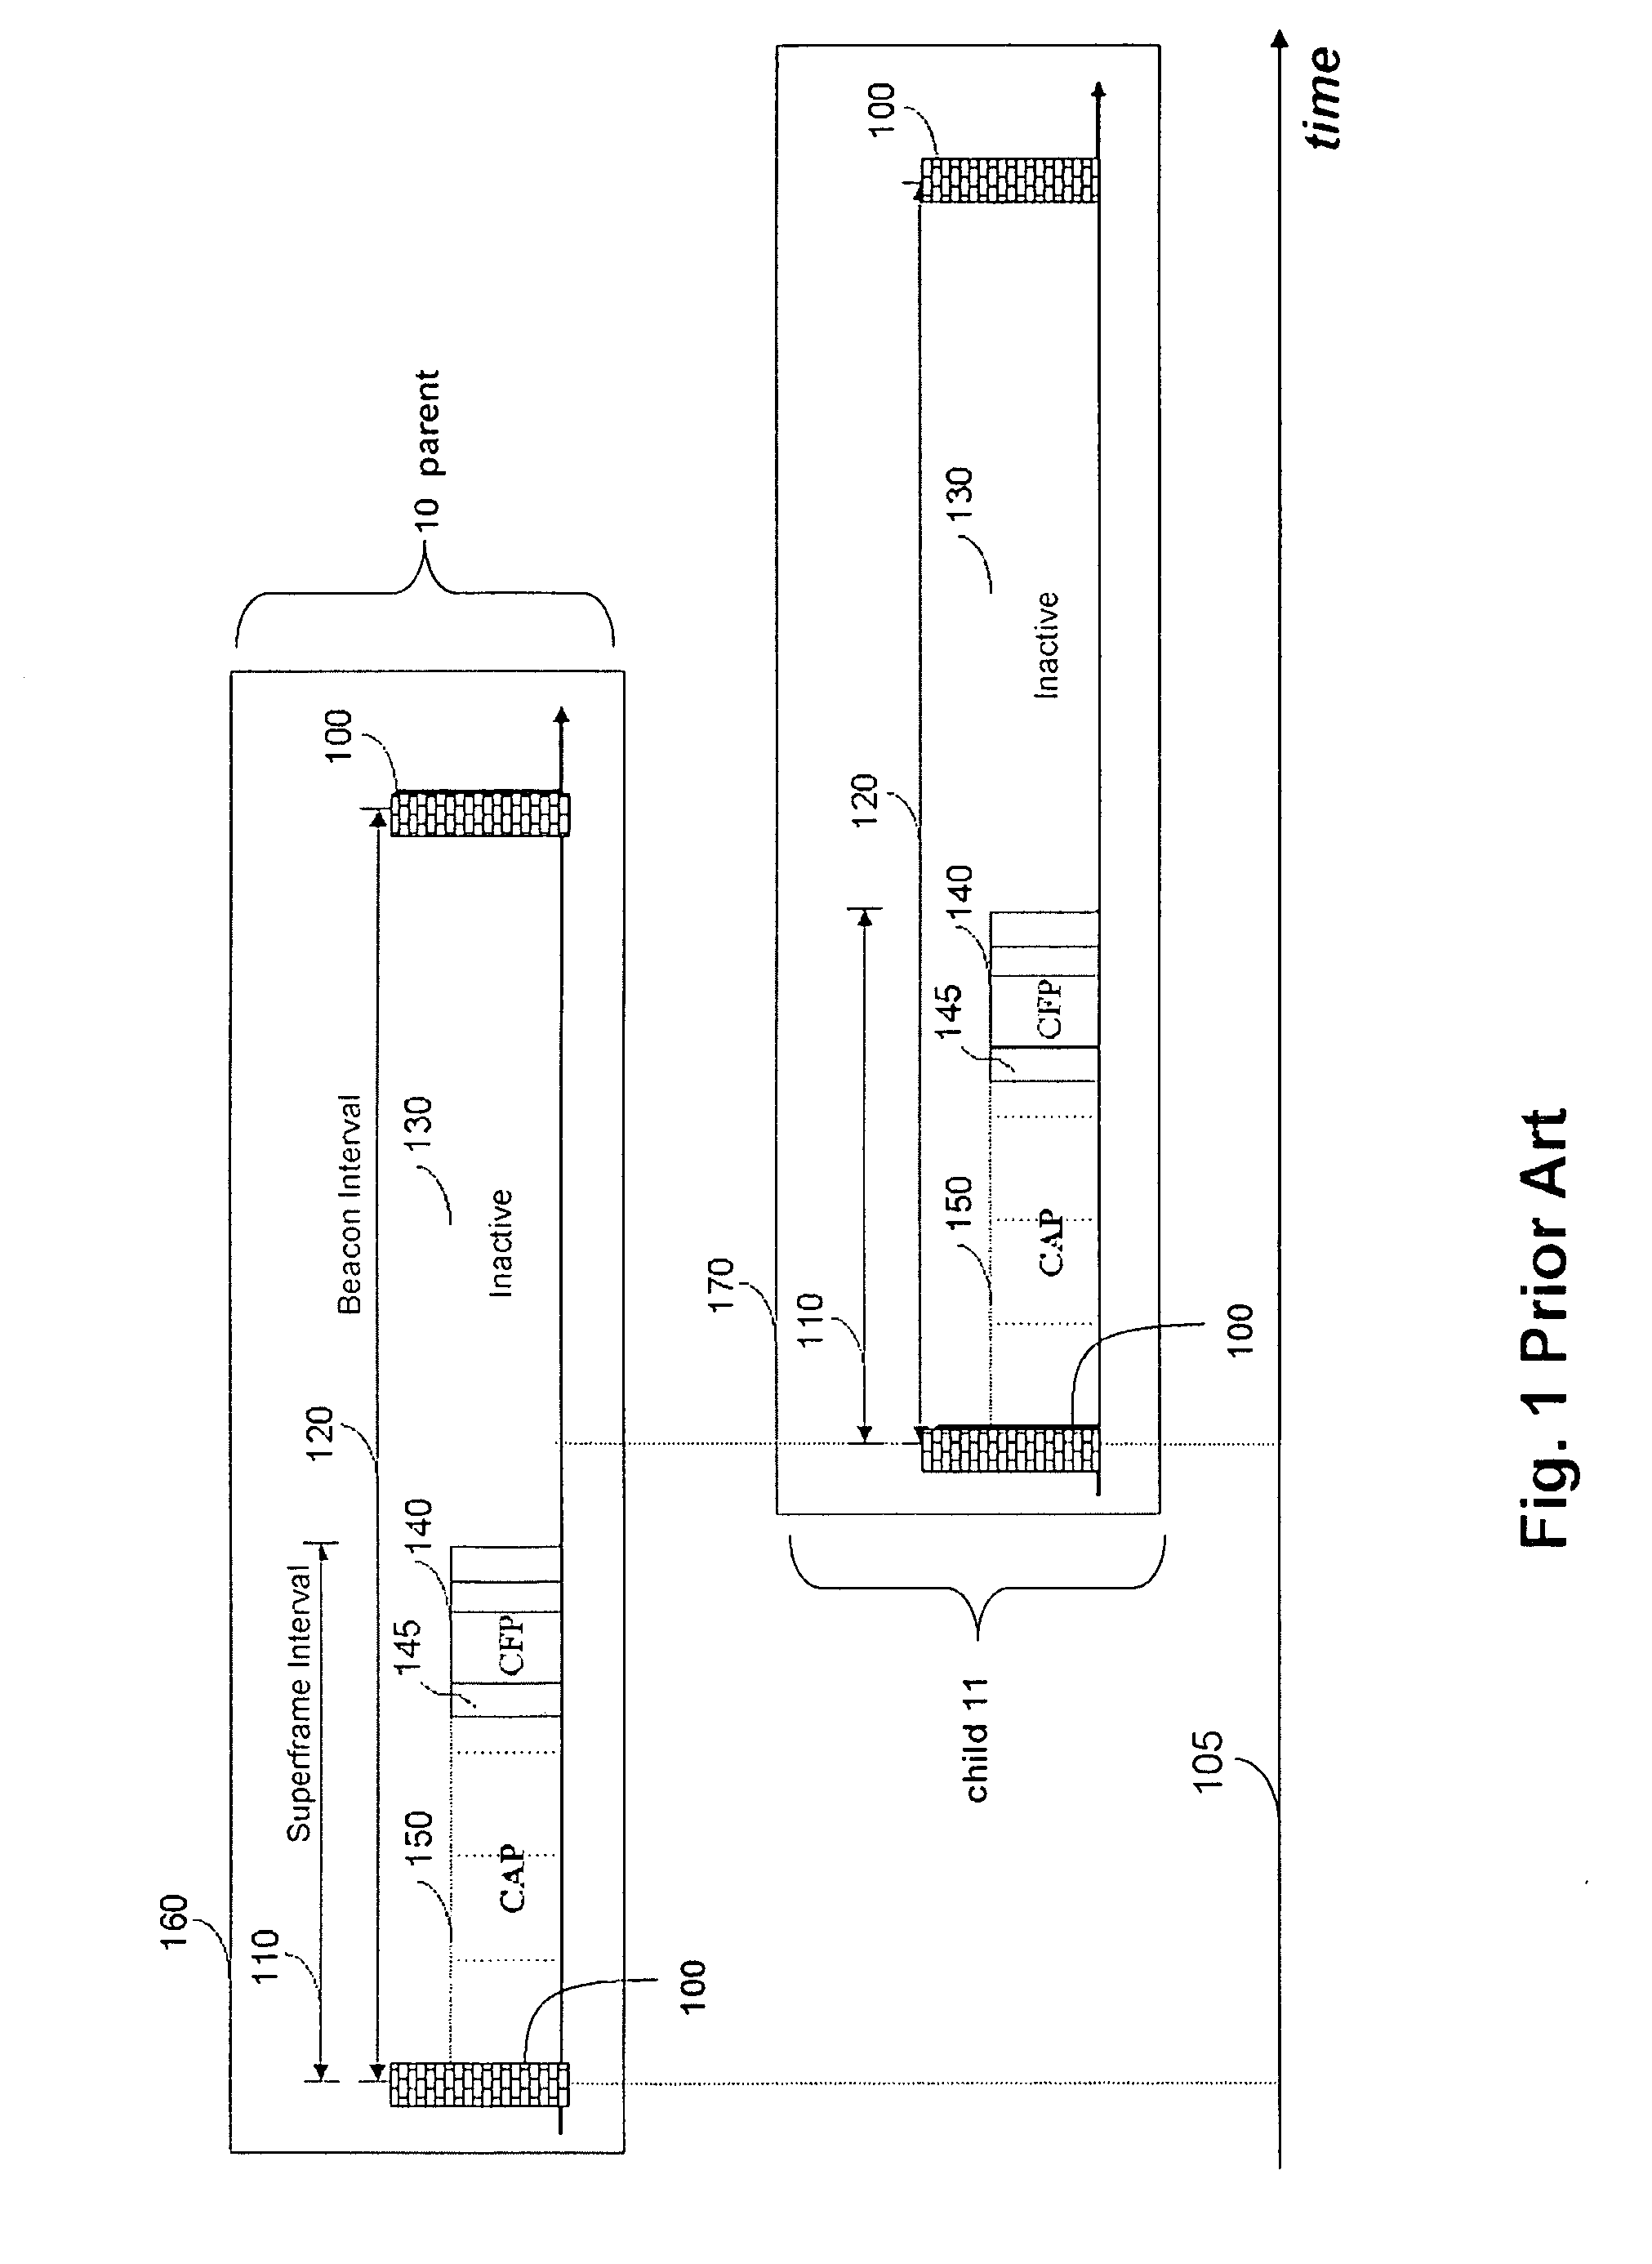 Hybrid Multiple Access Method and System in Wireless Networks